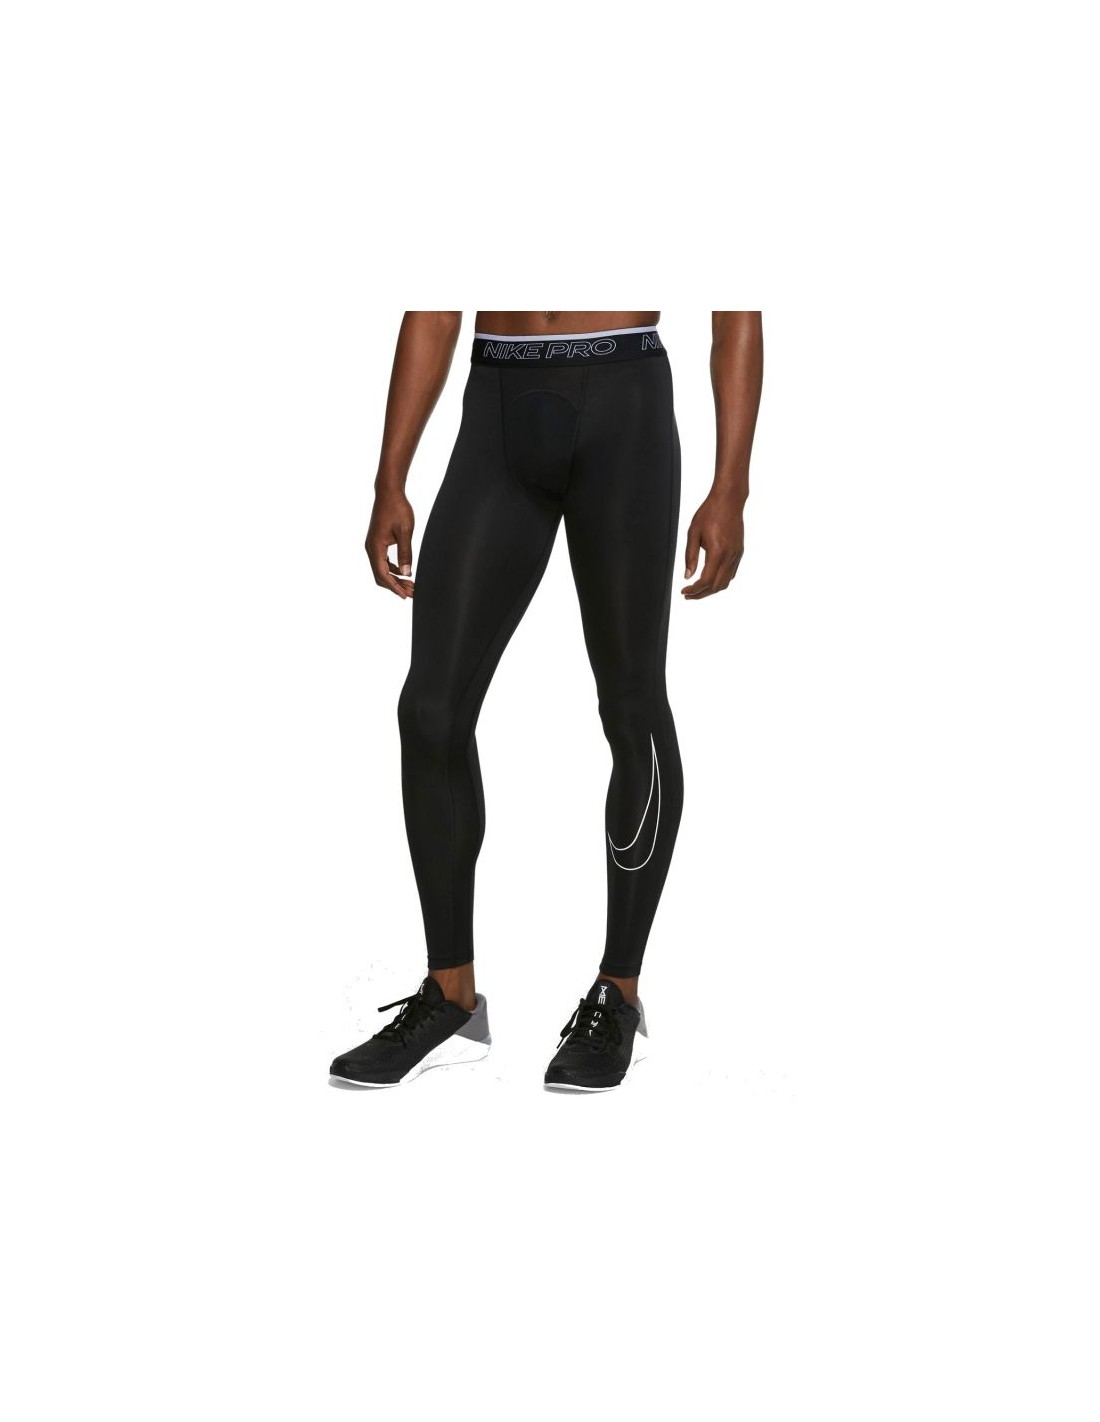 Nike Pro Hypercool 3/4 Compression Tights Pants Size M